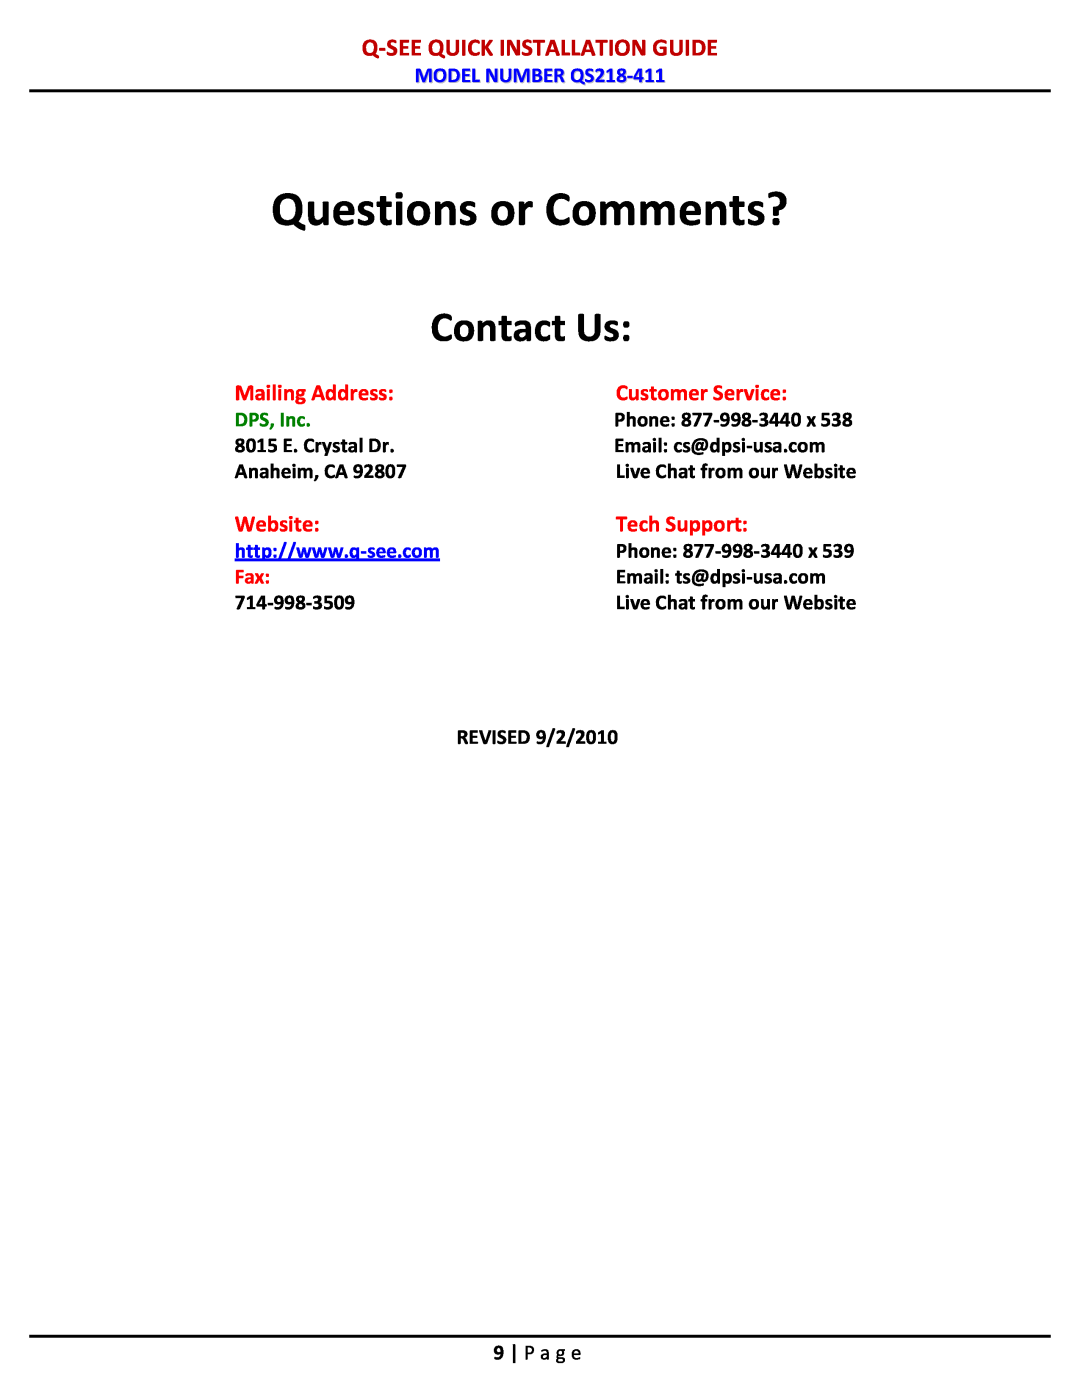 Q-See QS218-811 Phone, 8015 E. Crystal Dr, Anaheim, CA, REVISED 9/2/2010, Questions or Comments?, Contact Us, Website 